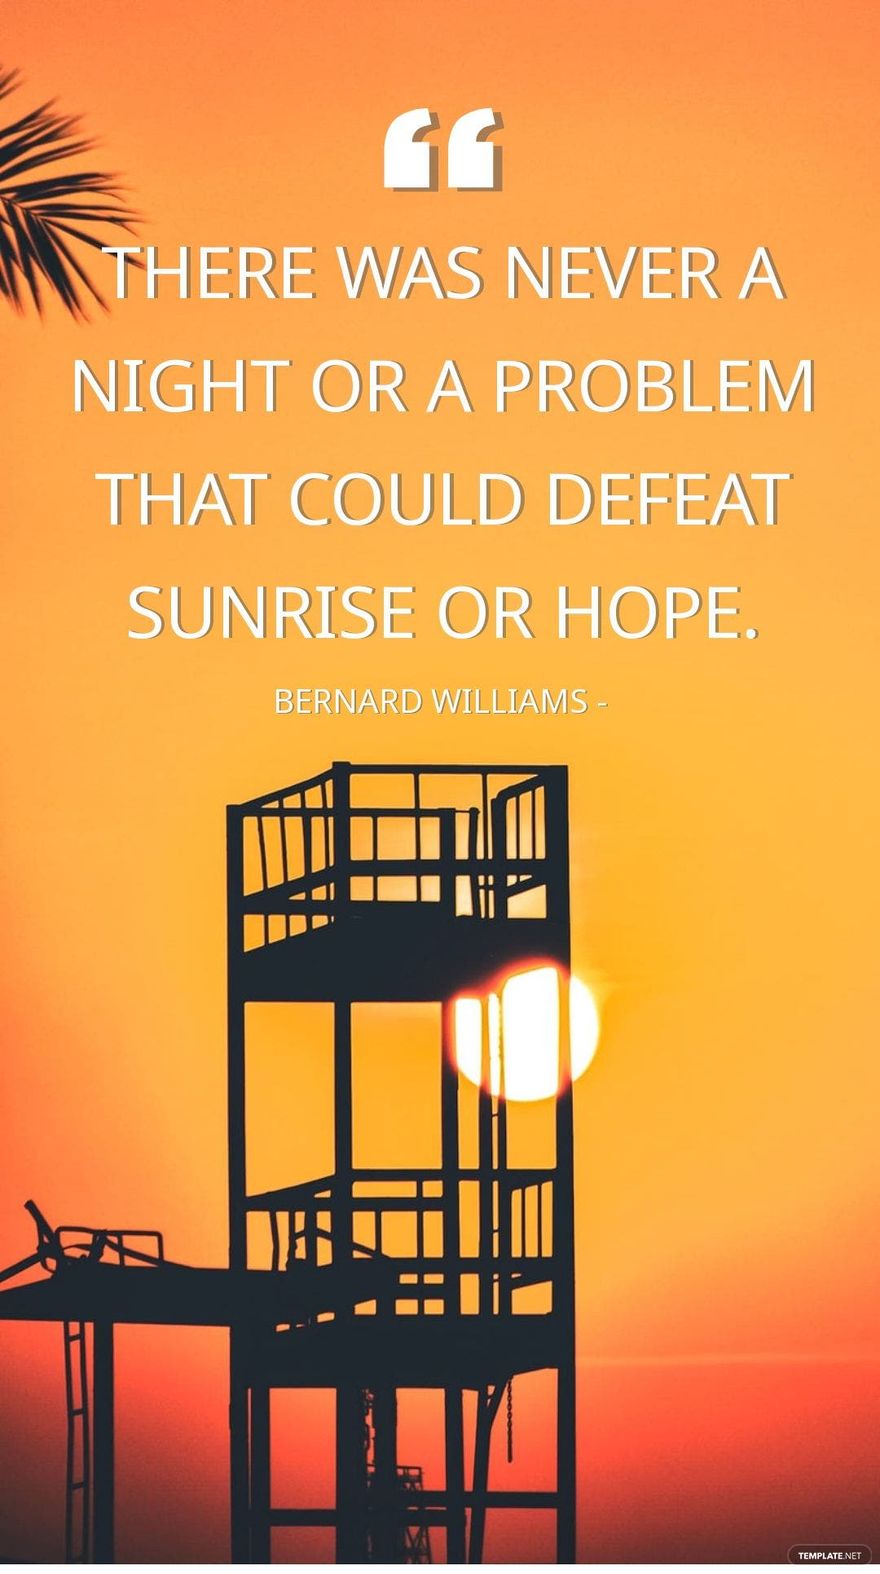 Bernard Williams - There was never a night or a problem that could defeat sunrise or hope.